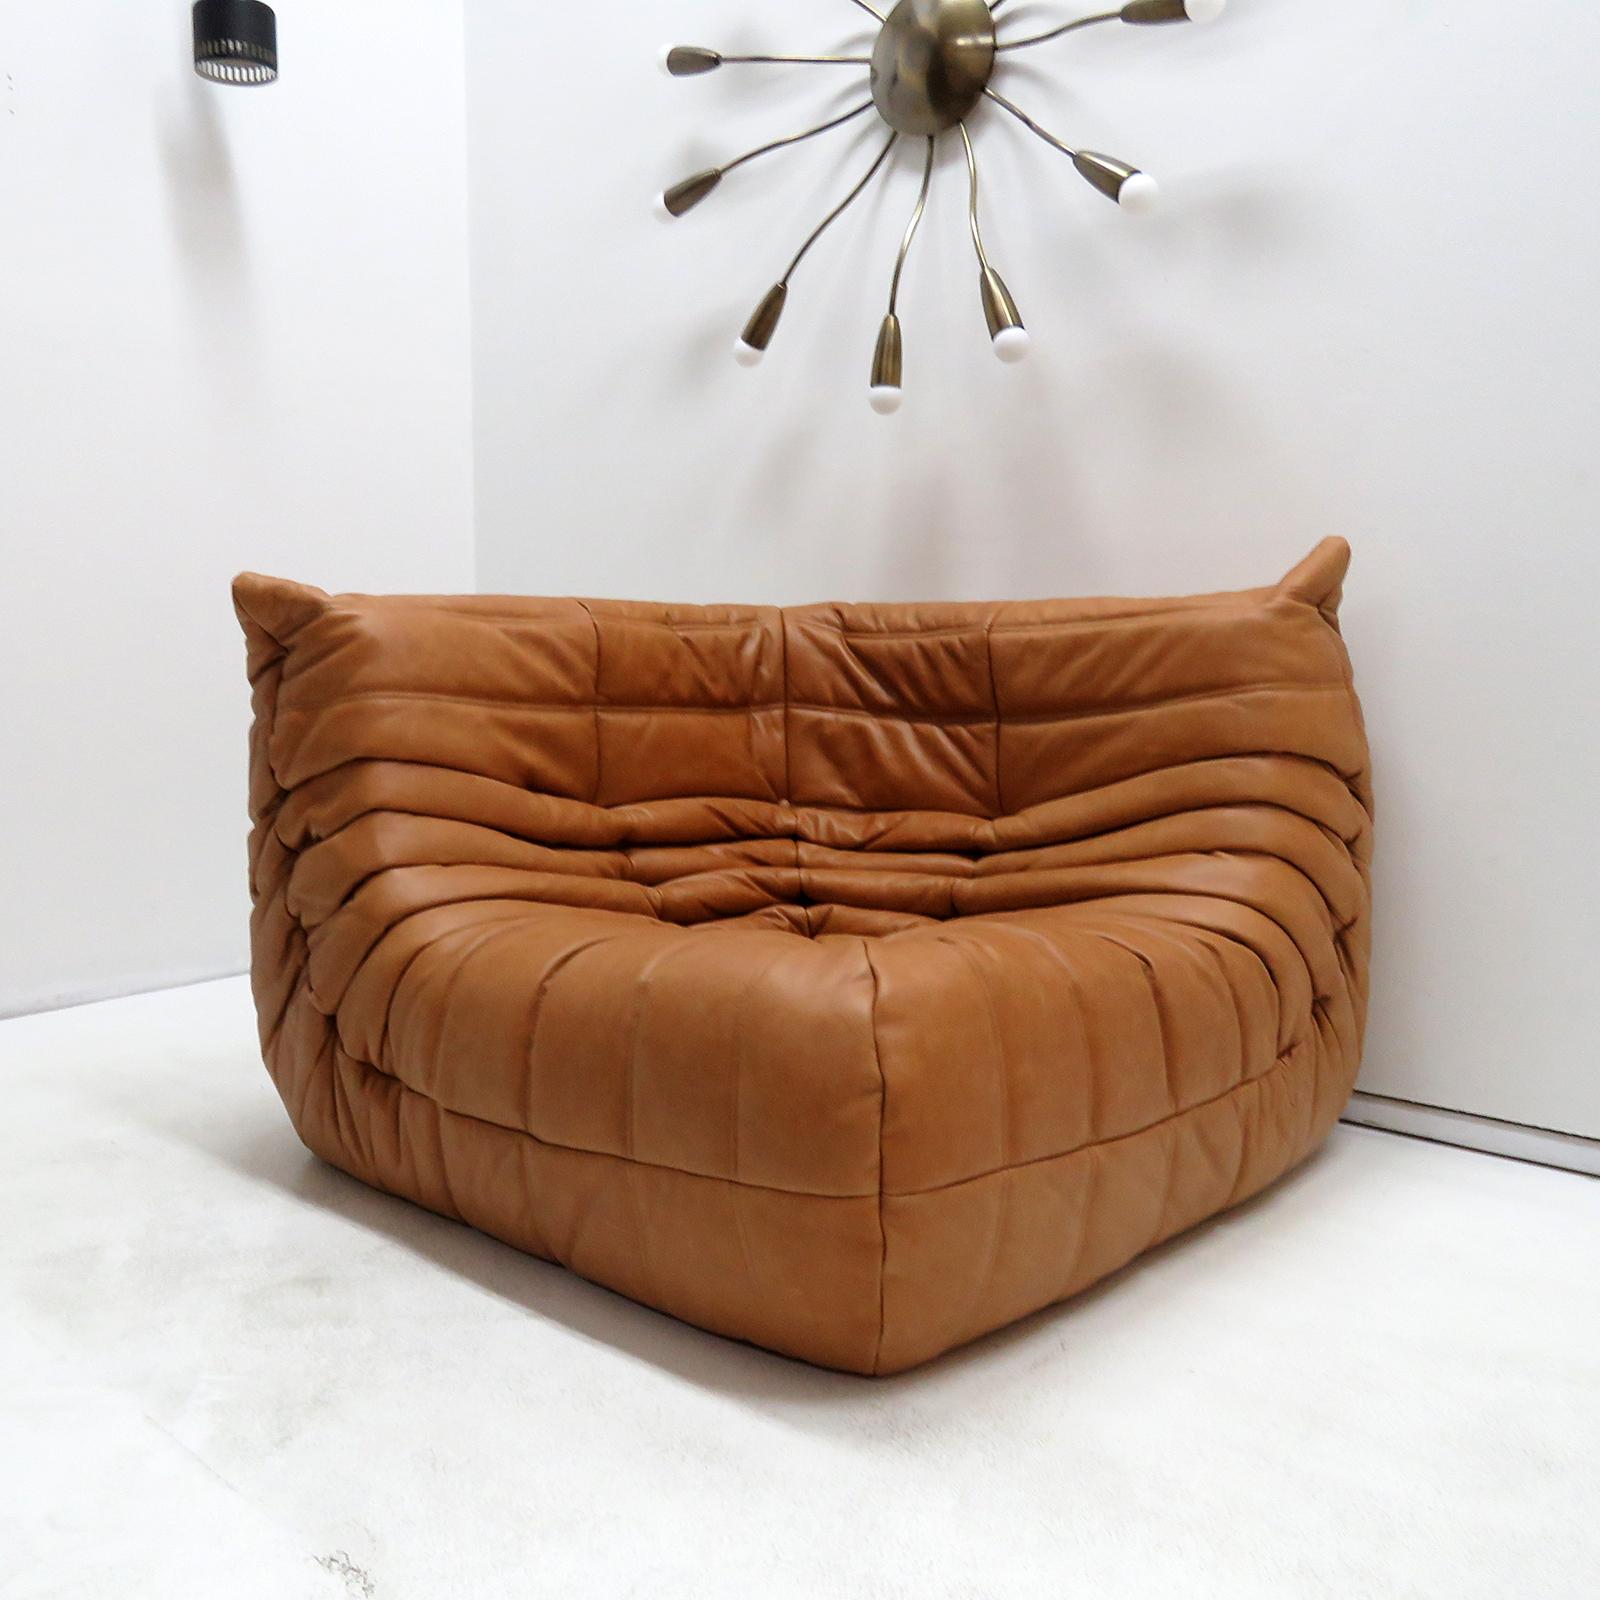 Stunning cognac colored aniline leather corner chair from the 